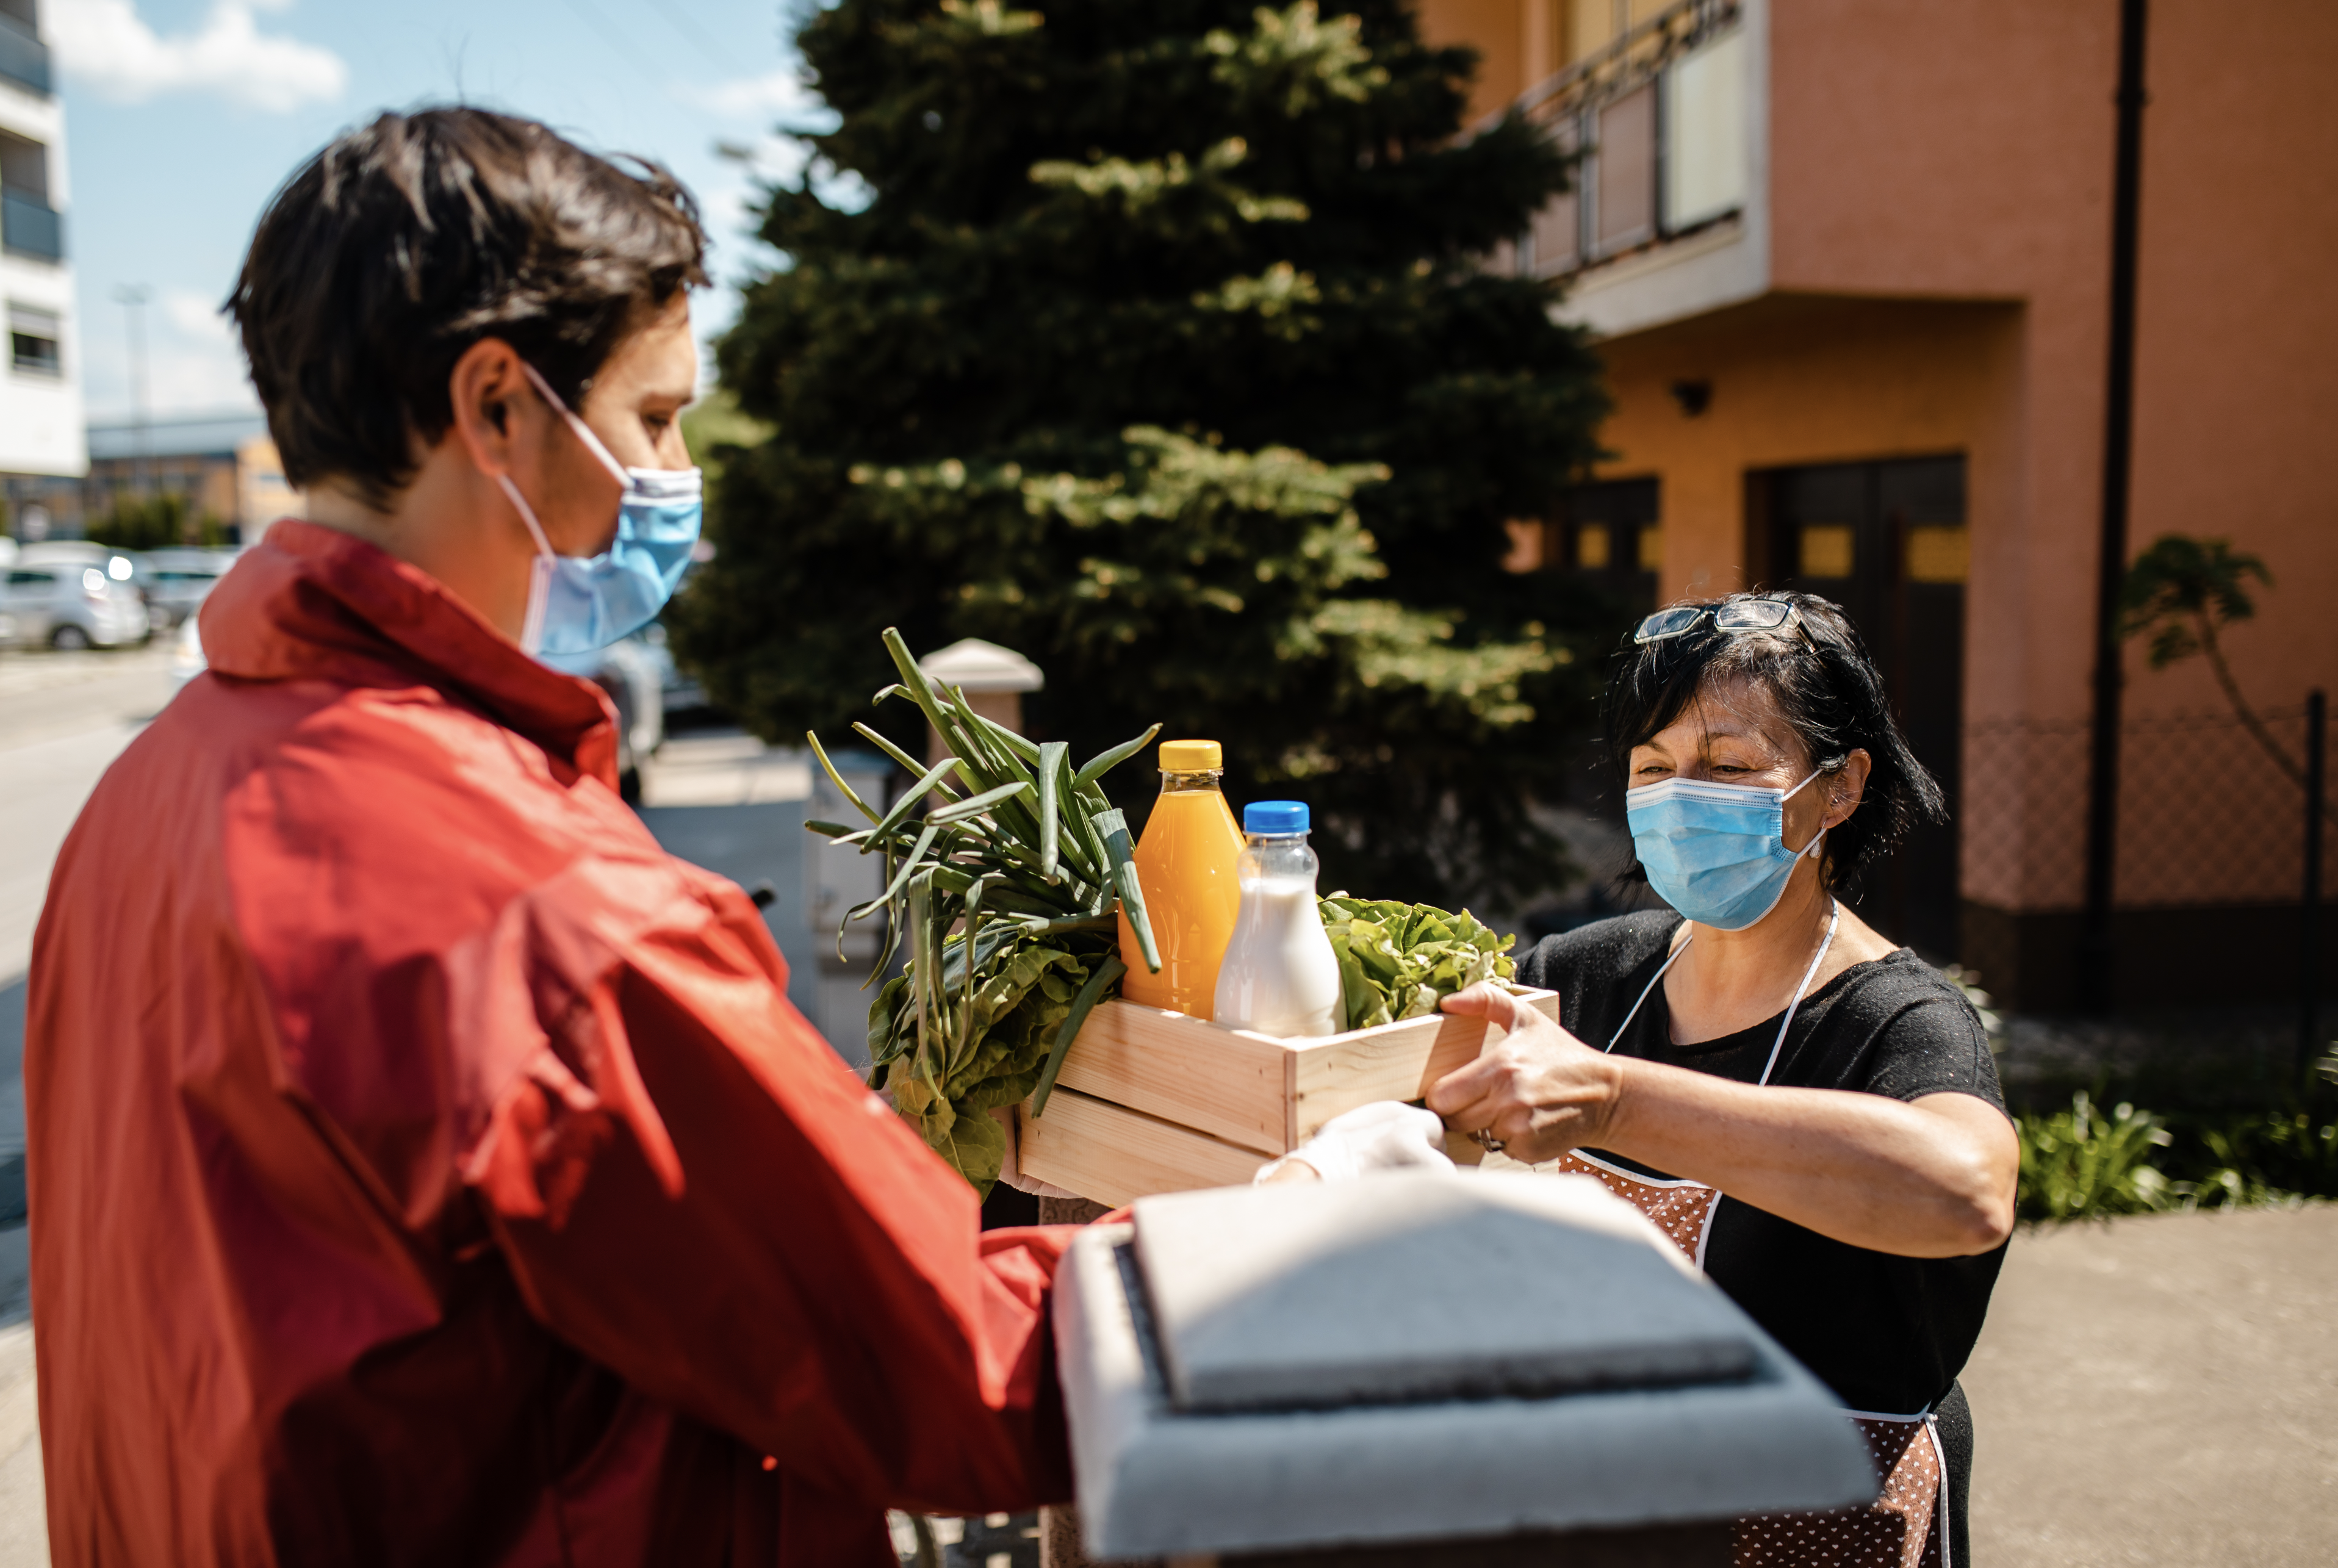 Young male delivery person delivering a crate with fresh vegetables to a senior woman, while they are wearing protective gloves and face masks during the coronavirus pandemic